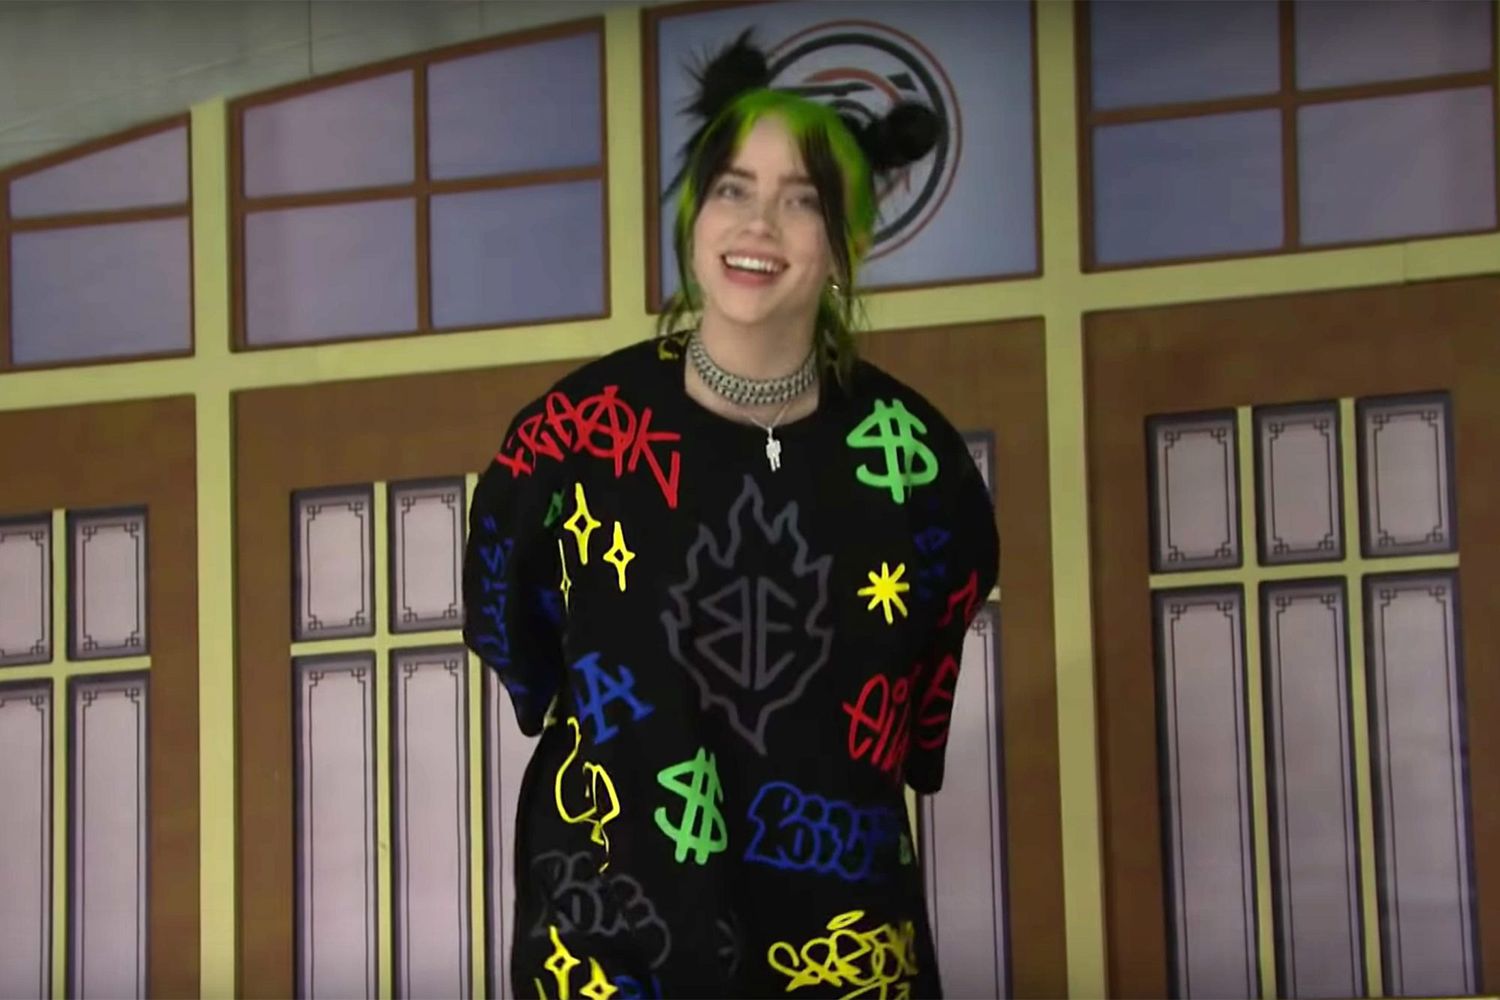 Billie Eilish's SNL outfit: Who was the designer behind it?